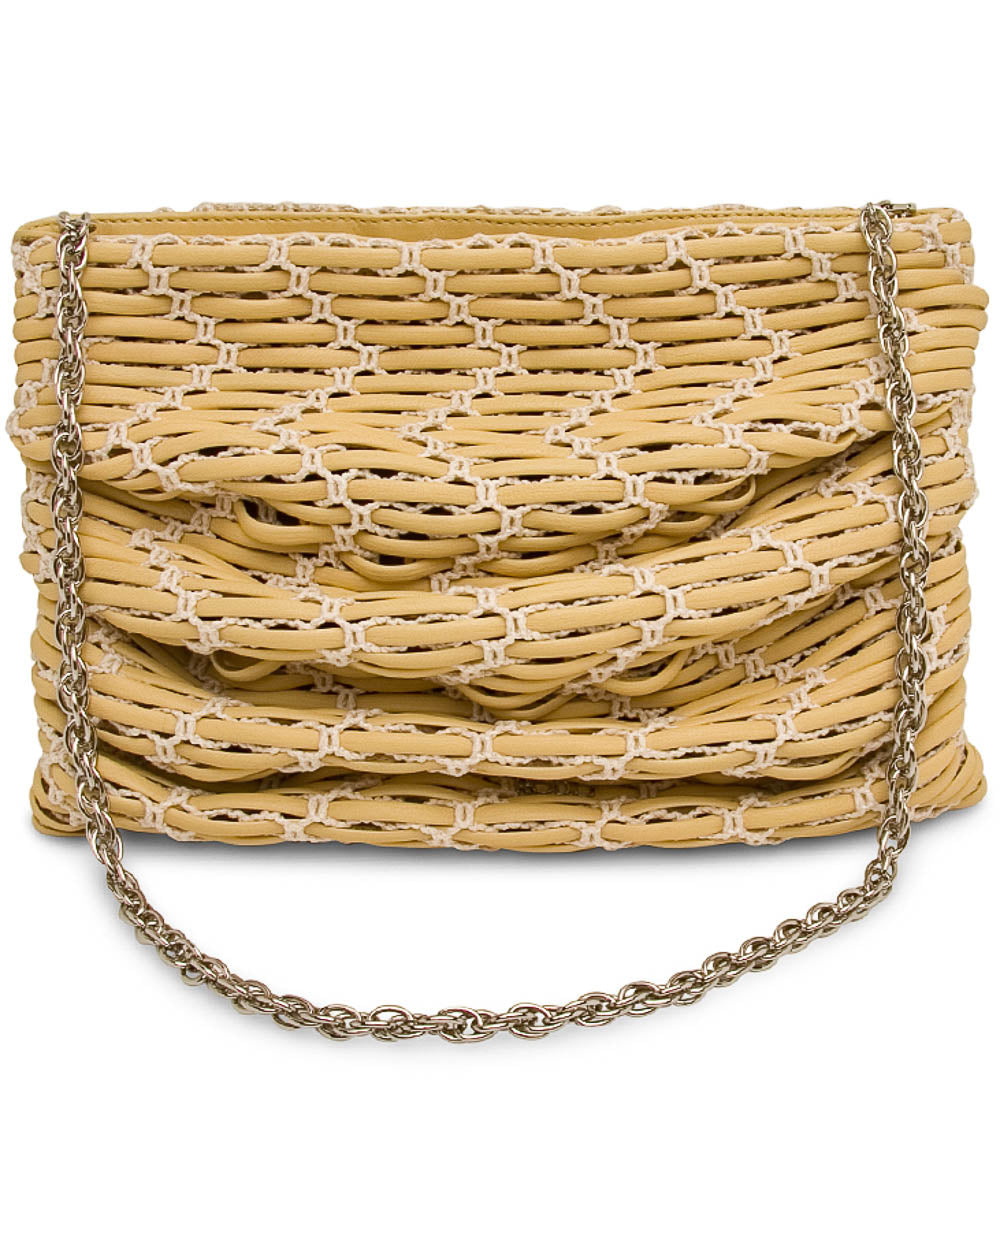 Abby Soft Ruched Clutch in Mimosa